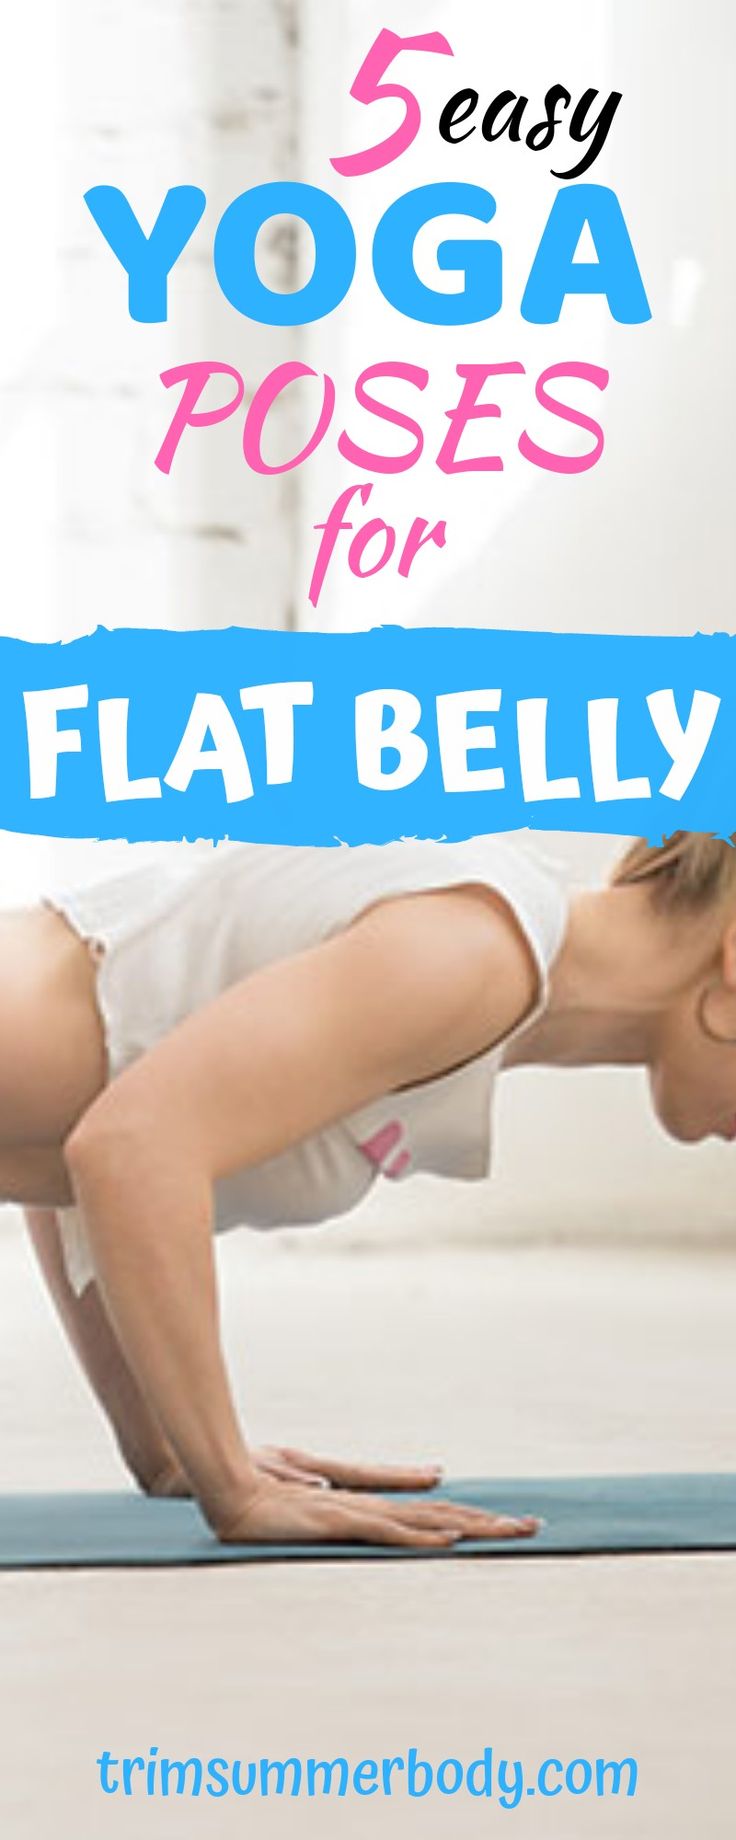 Yoga for flat belly | yoga poses 